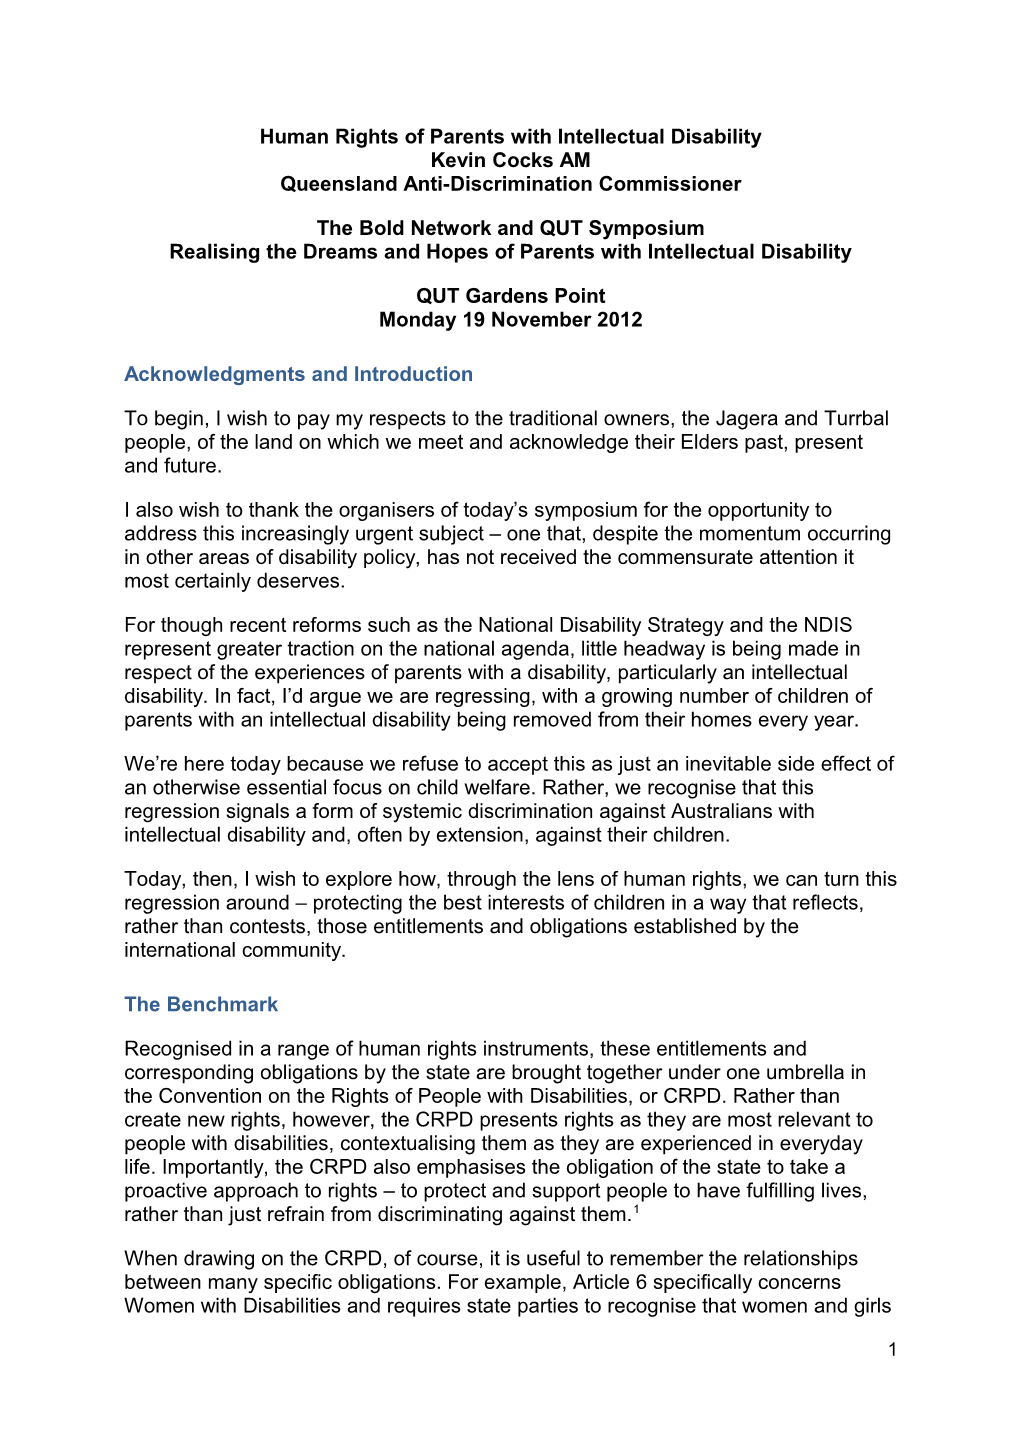 Human Rights of Parents with Intellectual Disability